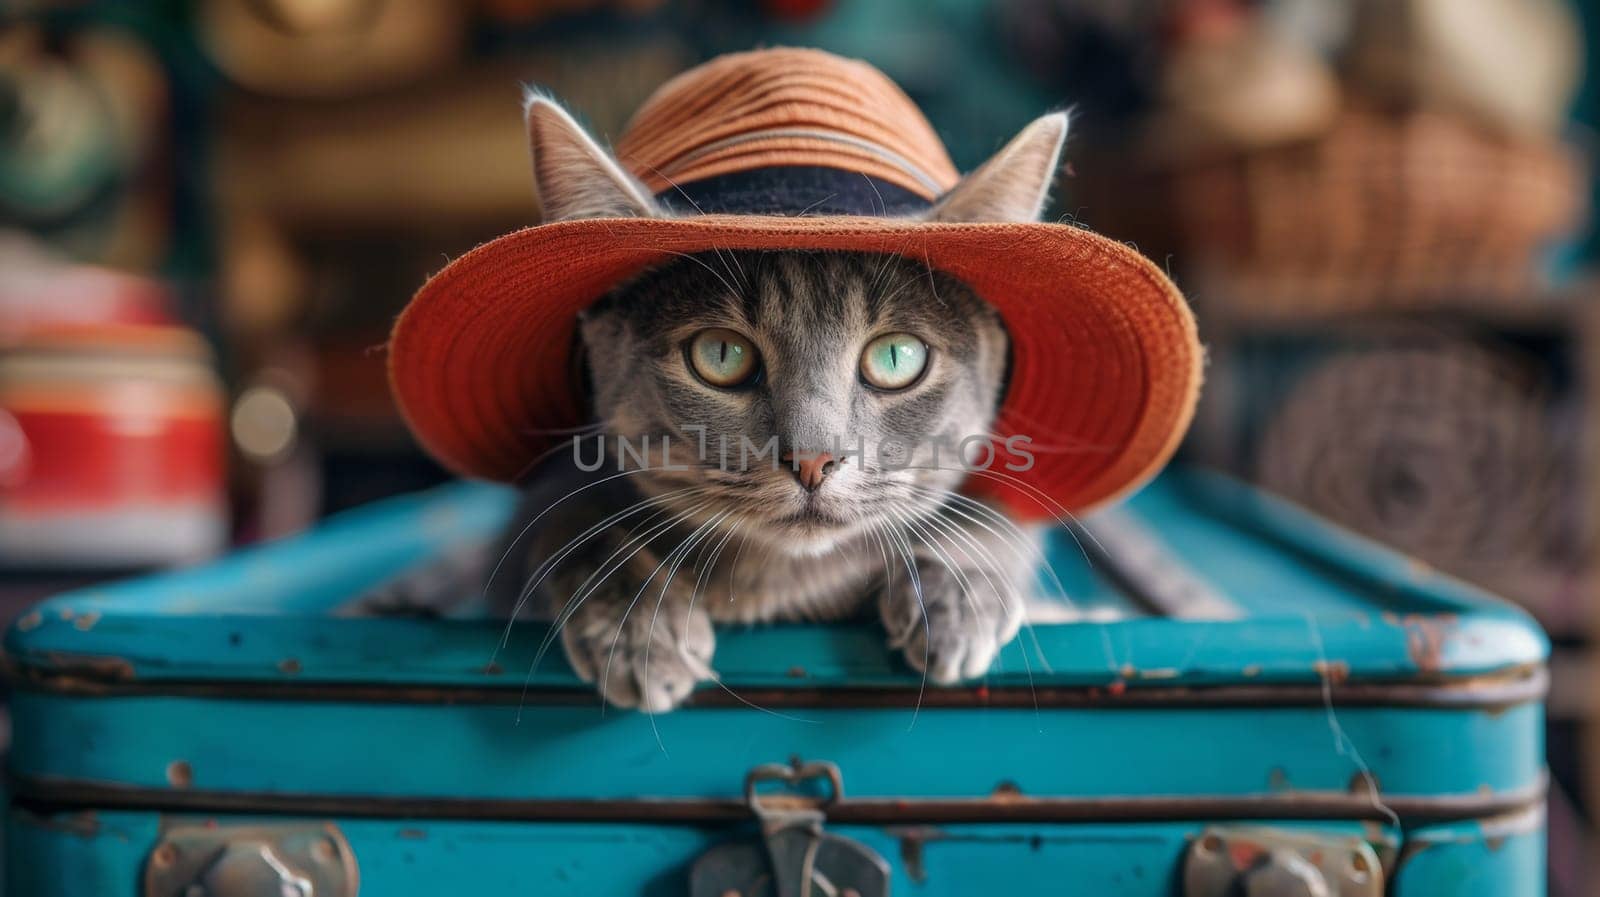 A cat wearing a hat sitting in an open suitcase, AI by starush